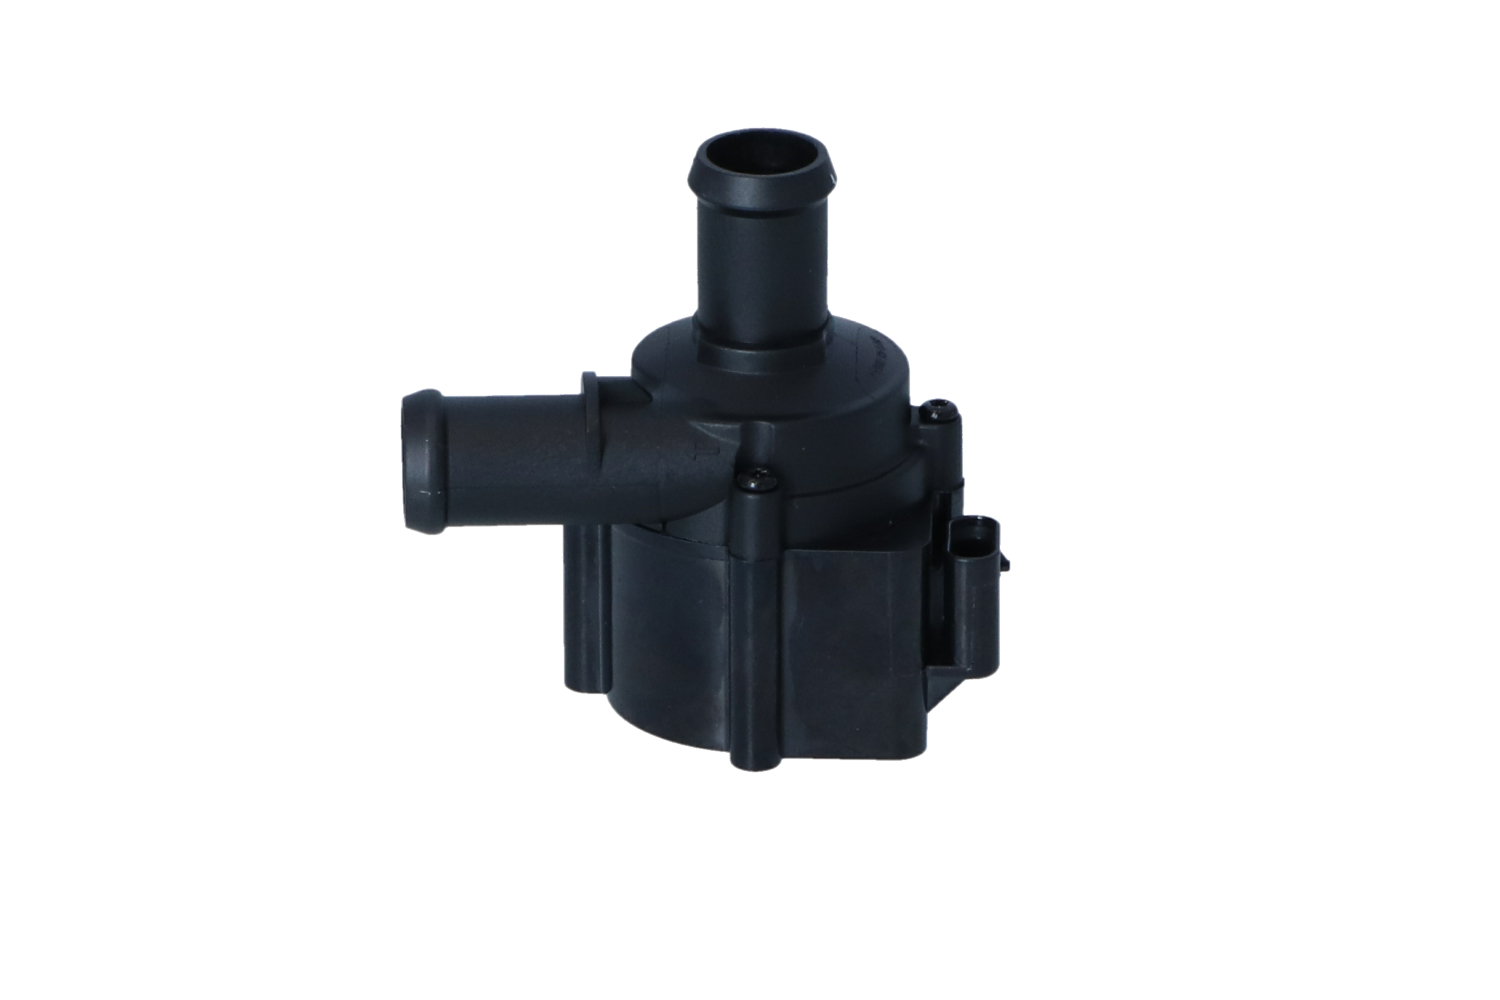 Porsche Auxiliary water pump NRF 390010 at a good price